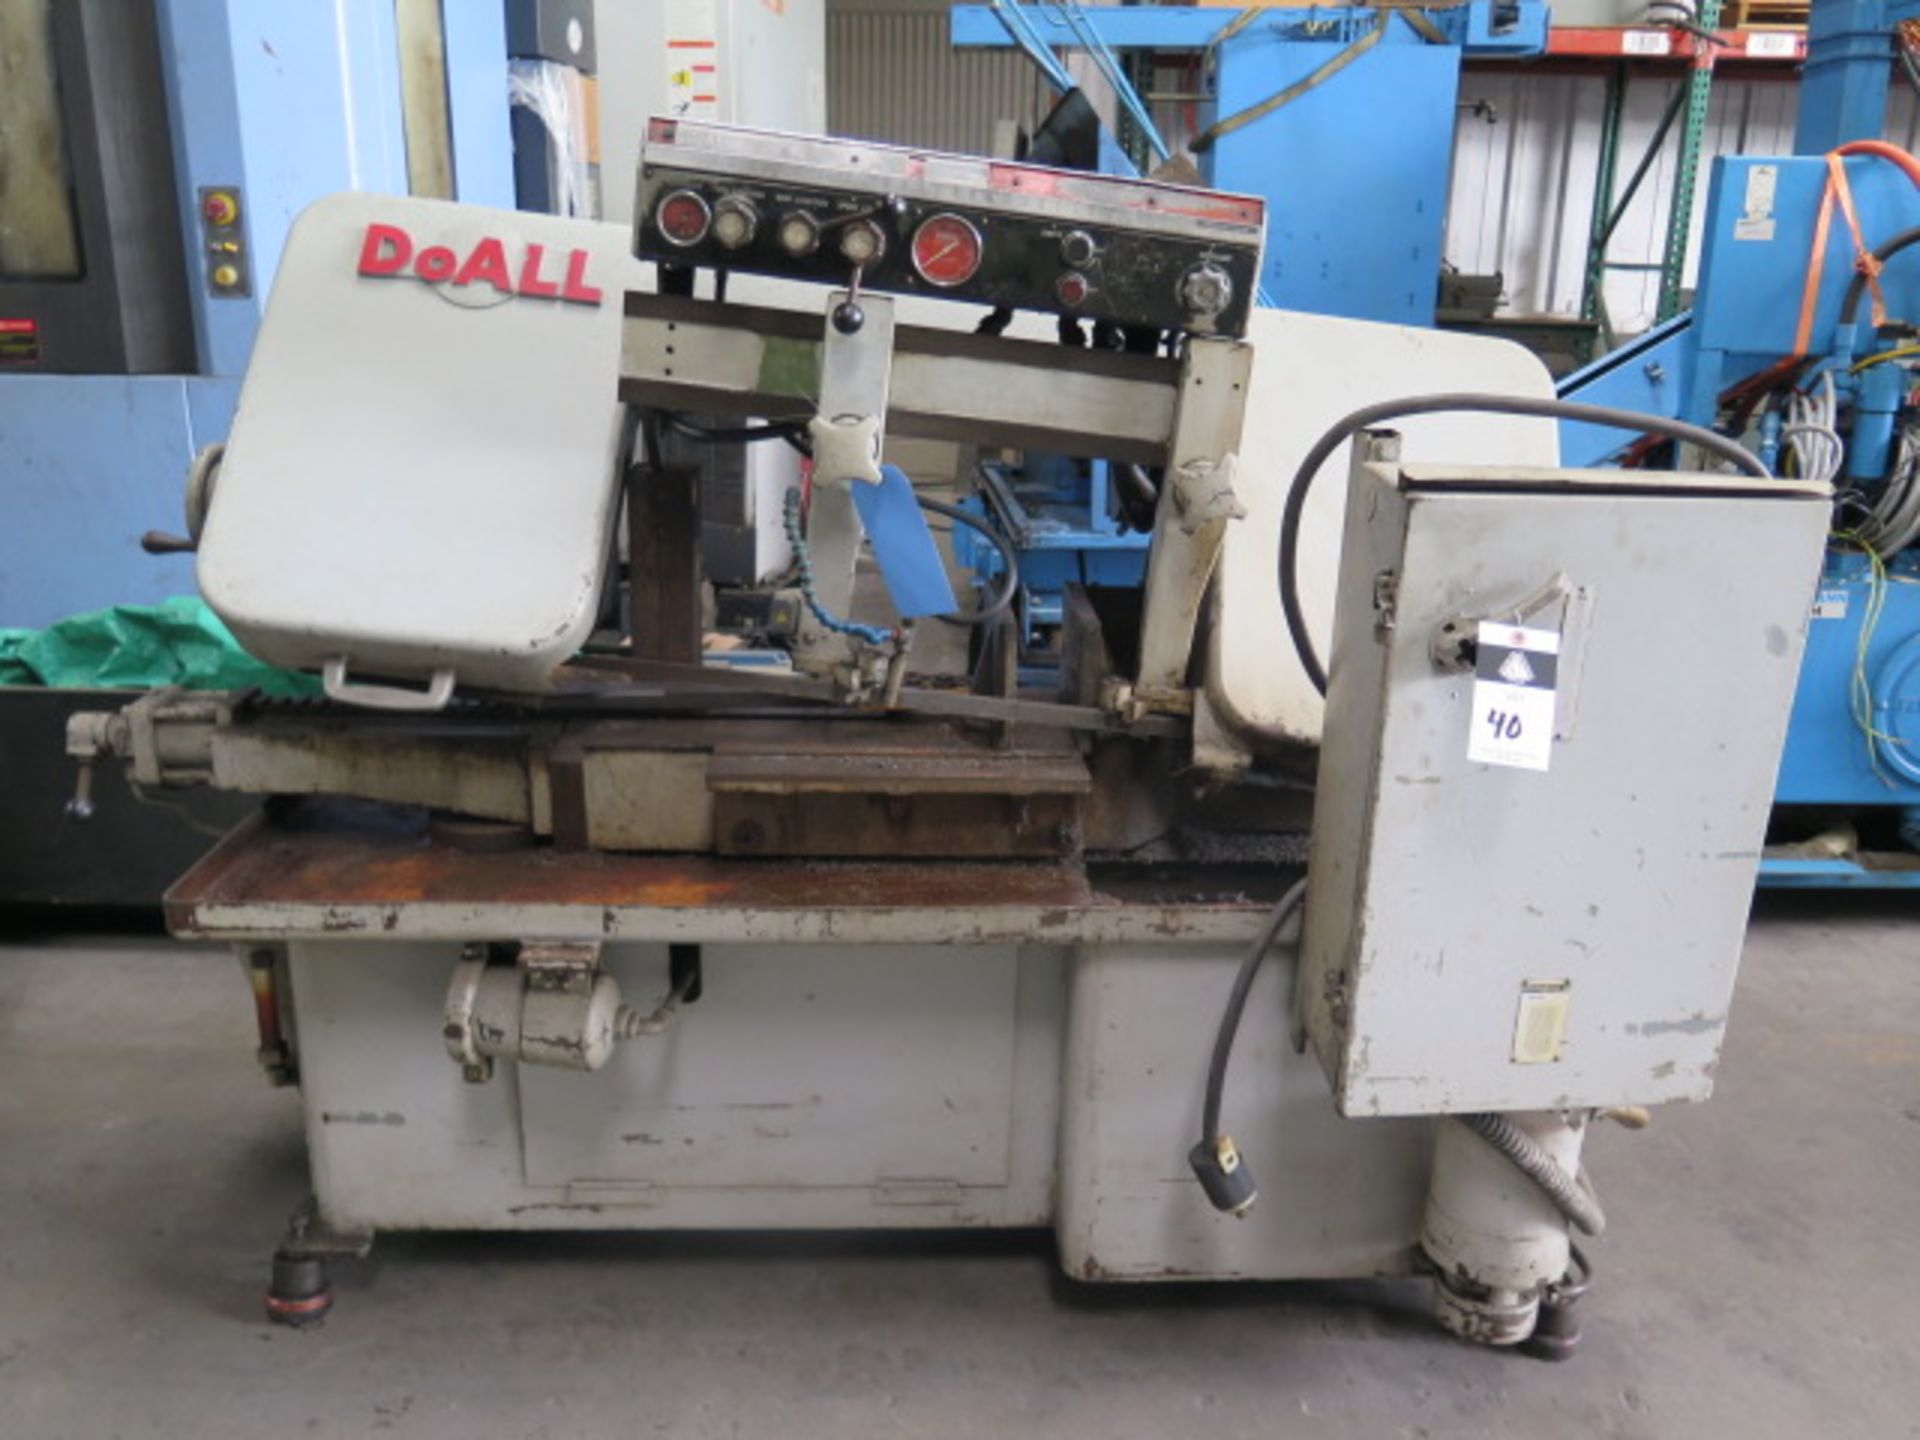 DoAll 12" Hydraulic Horizontal Band Saw w/ Hydraulic Clamping (SOLD AS-IS - NO WARRANTY)